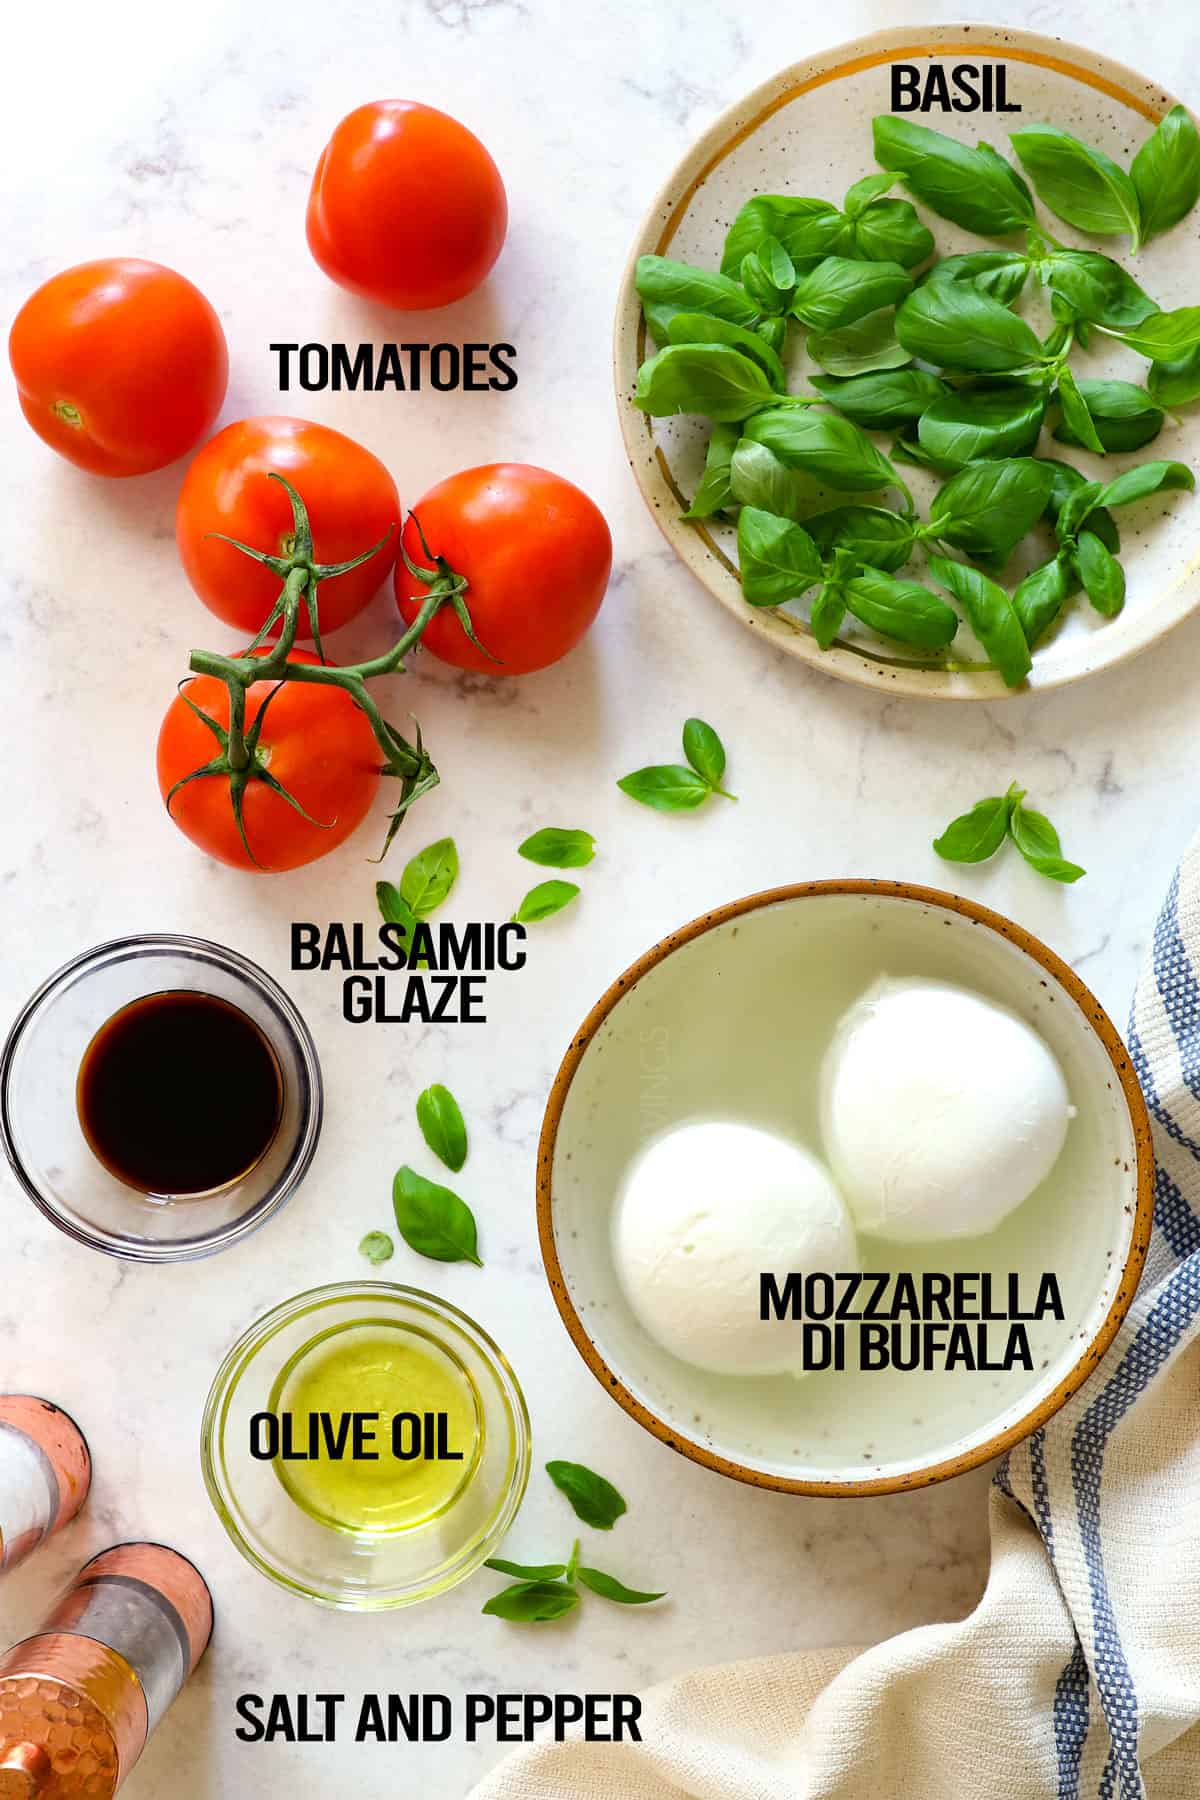 showing how to make Caprese Salad by laying out ingredients: tomatoes, basil, mozzarella, olive oil, salt and pepper